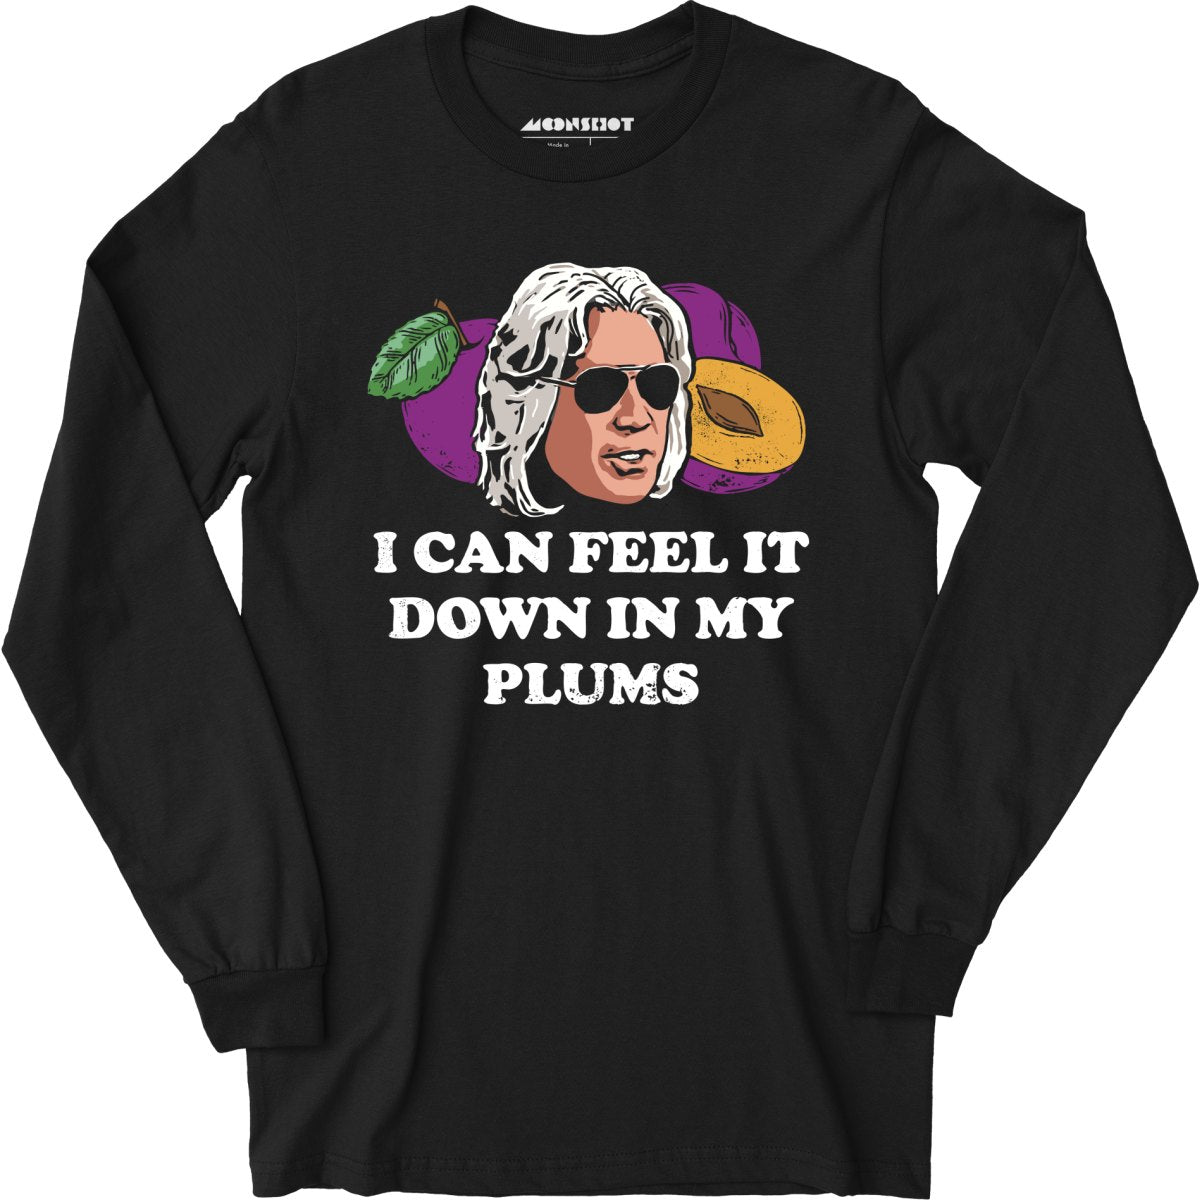 I Can Feel it Down in My Plums - Long Sleeve T-Shirt